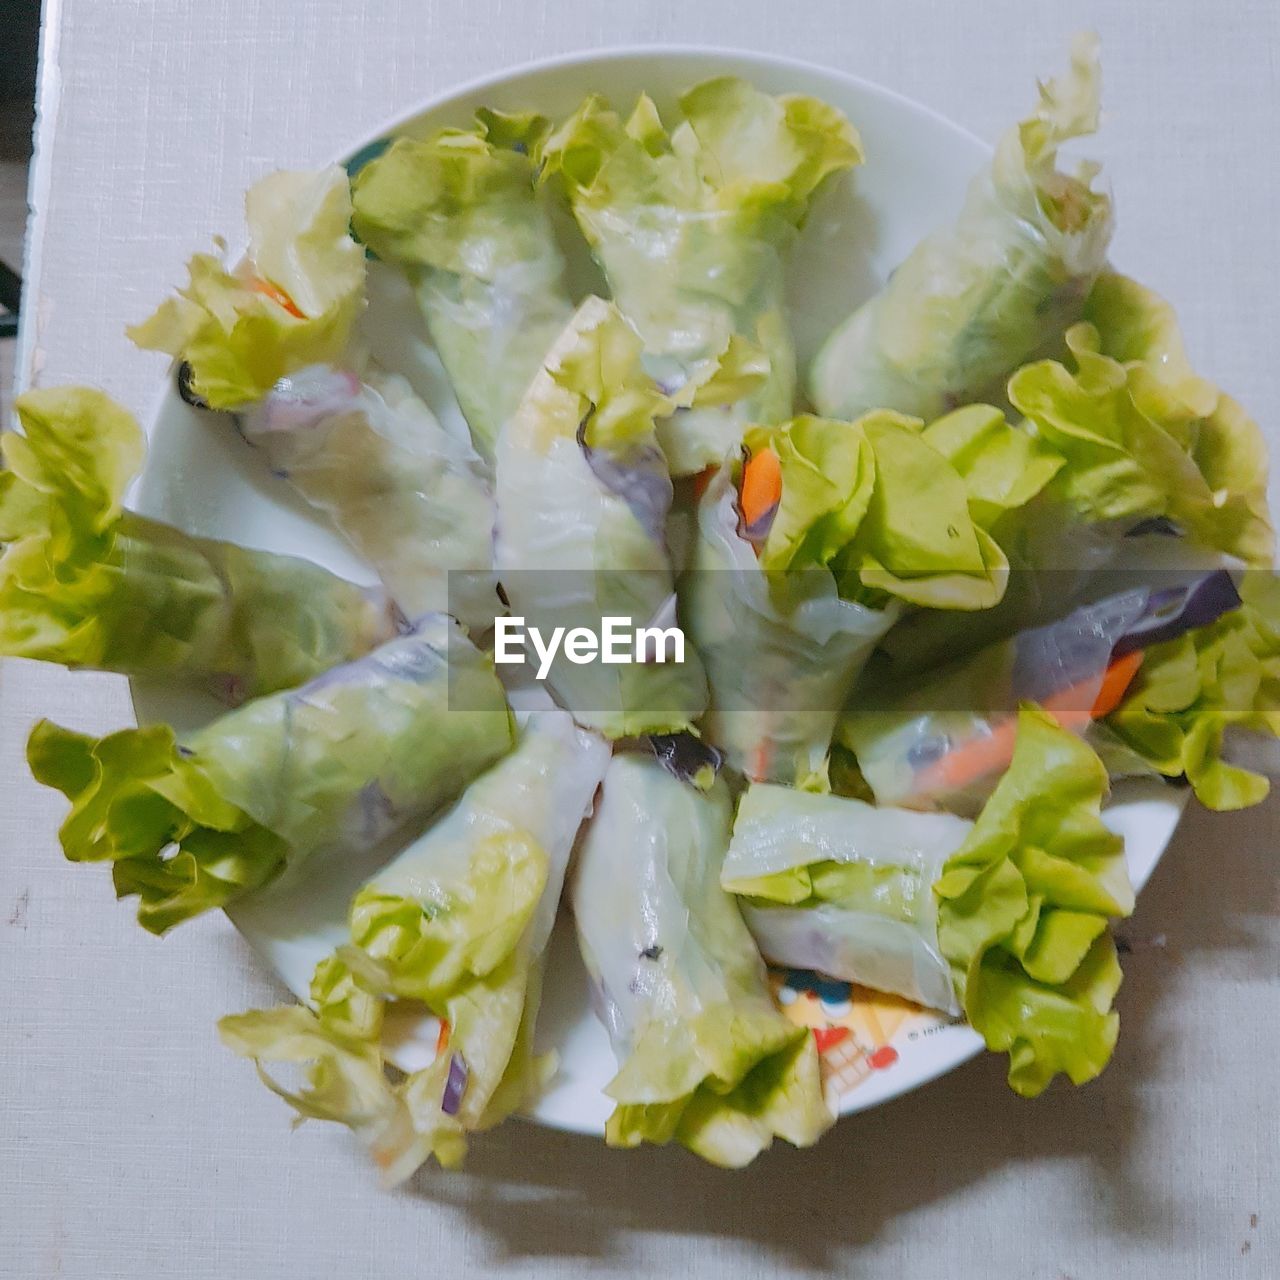 HIGH ANGLE VIEW OF VEGETABLES IN PLATE